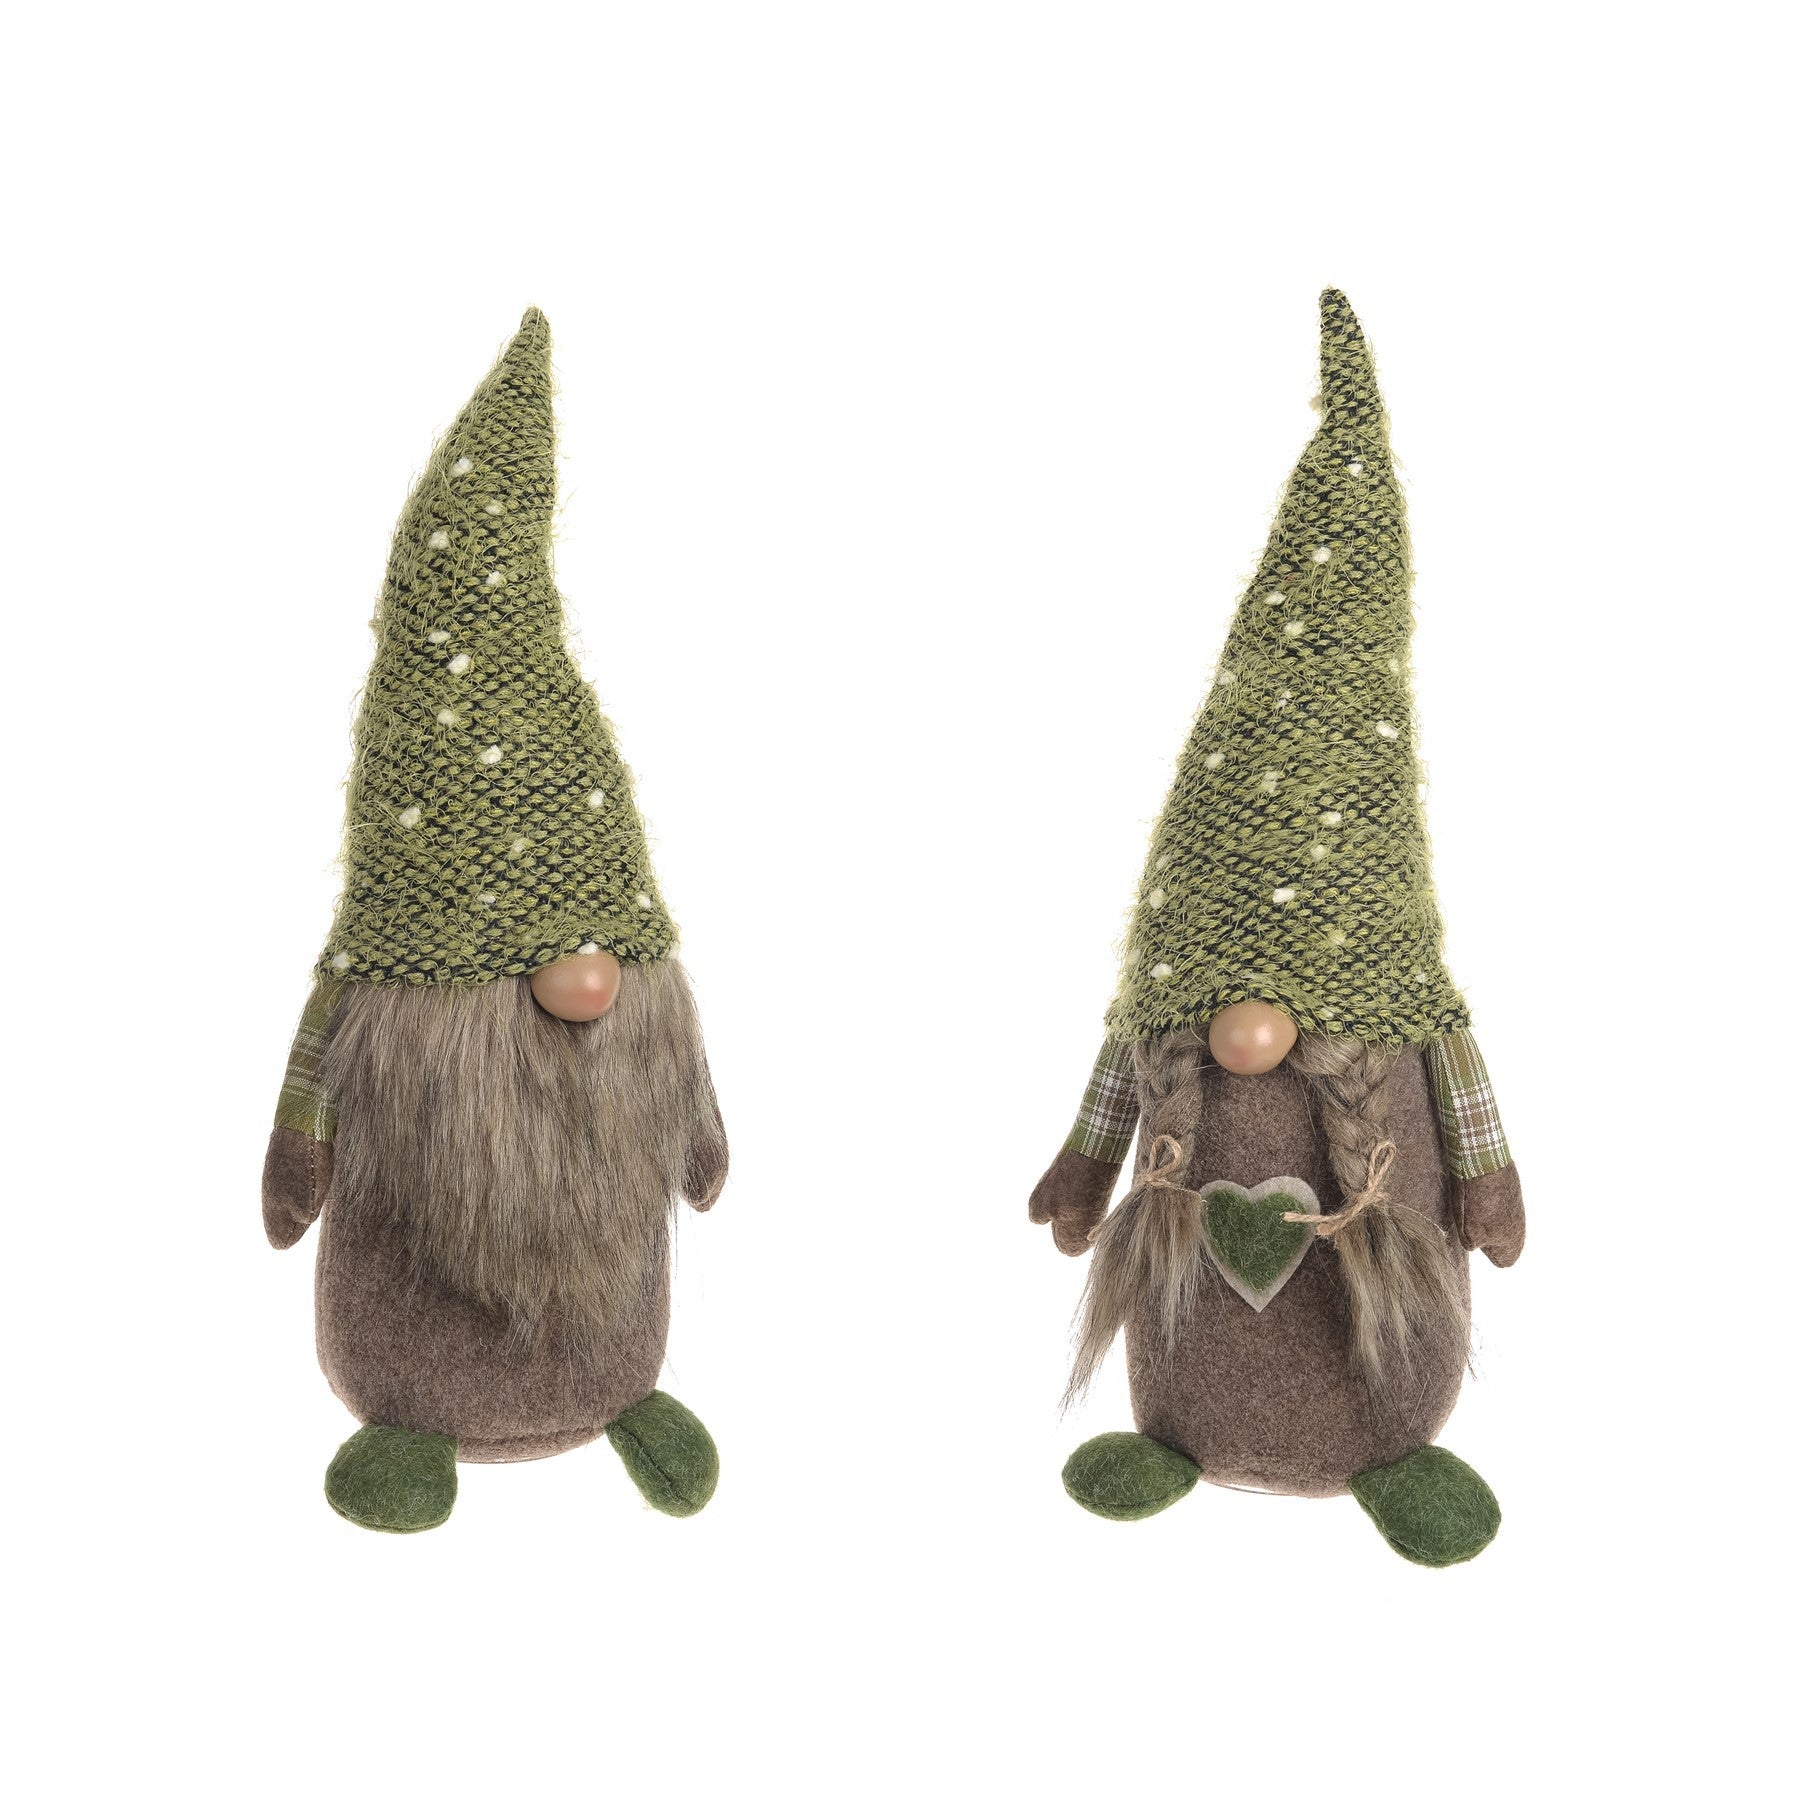 View Fabric Green Gonk Set of 2 information